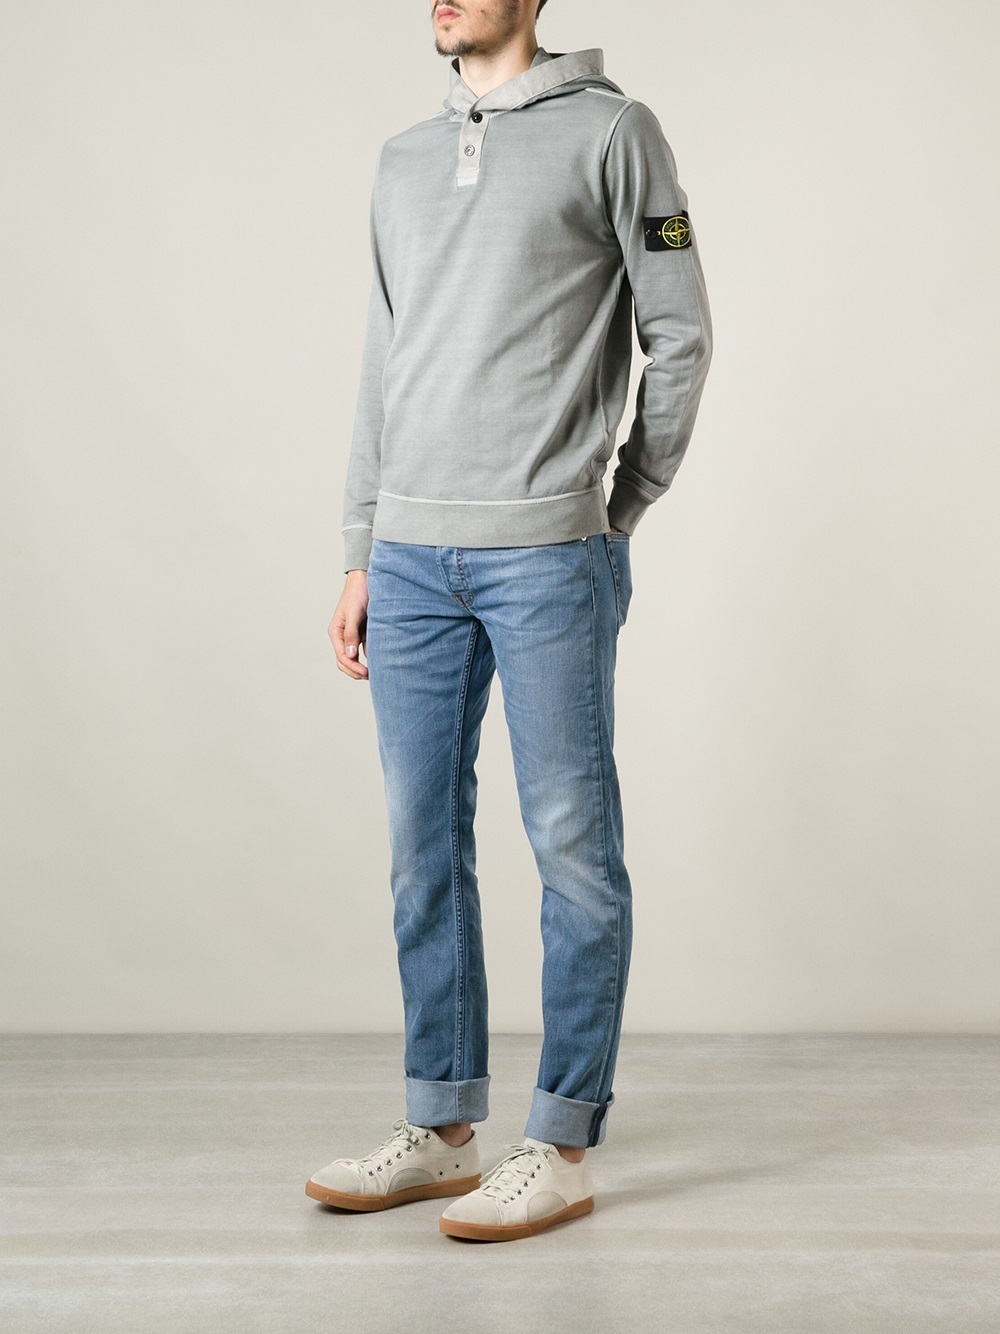 Stone Island Stone Washed Jeans in Blue for Men - Lyst